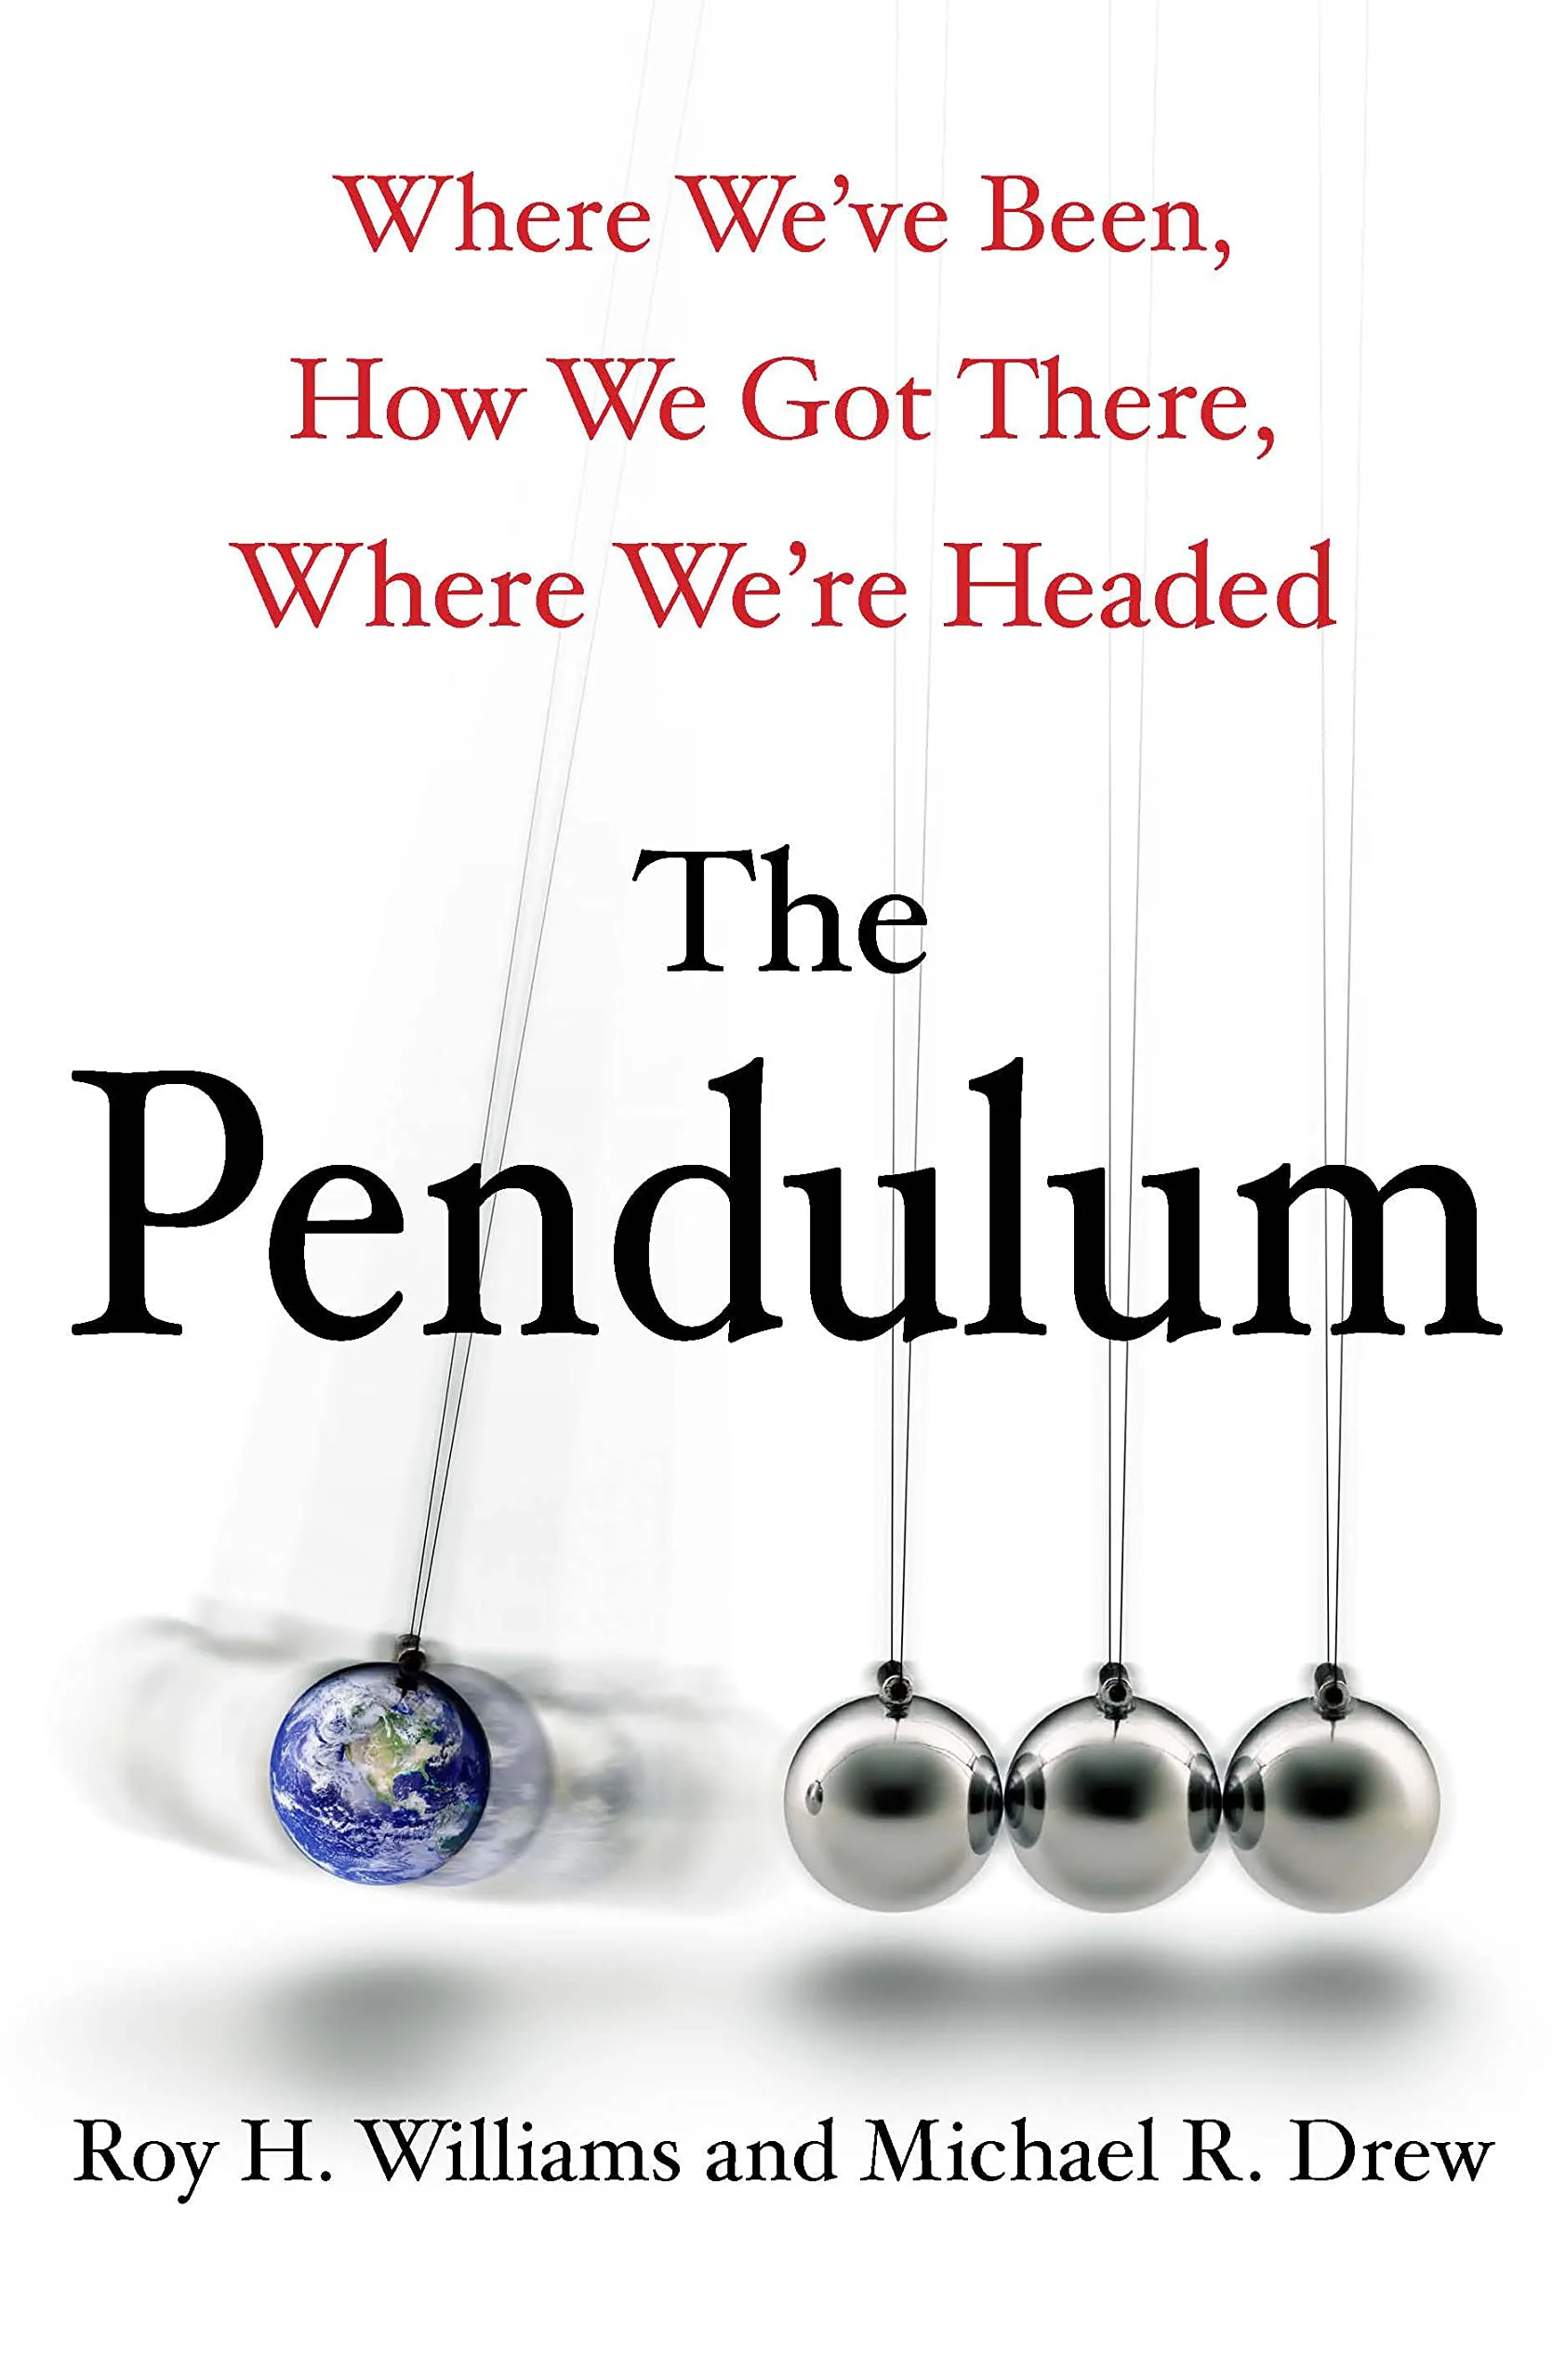 Cover of the book title Pendulum